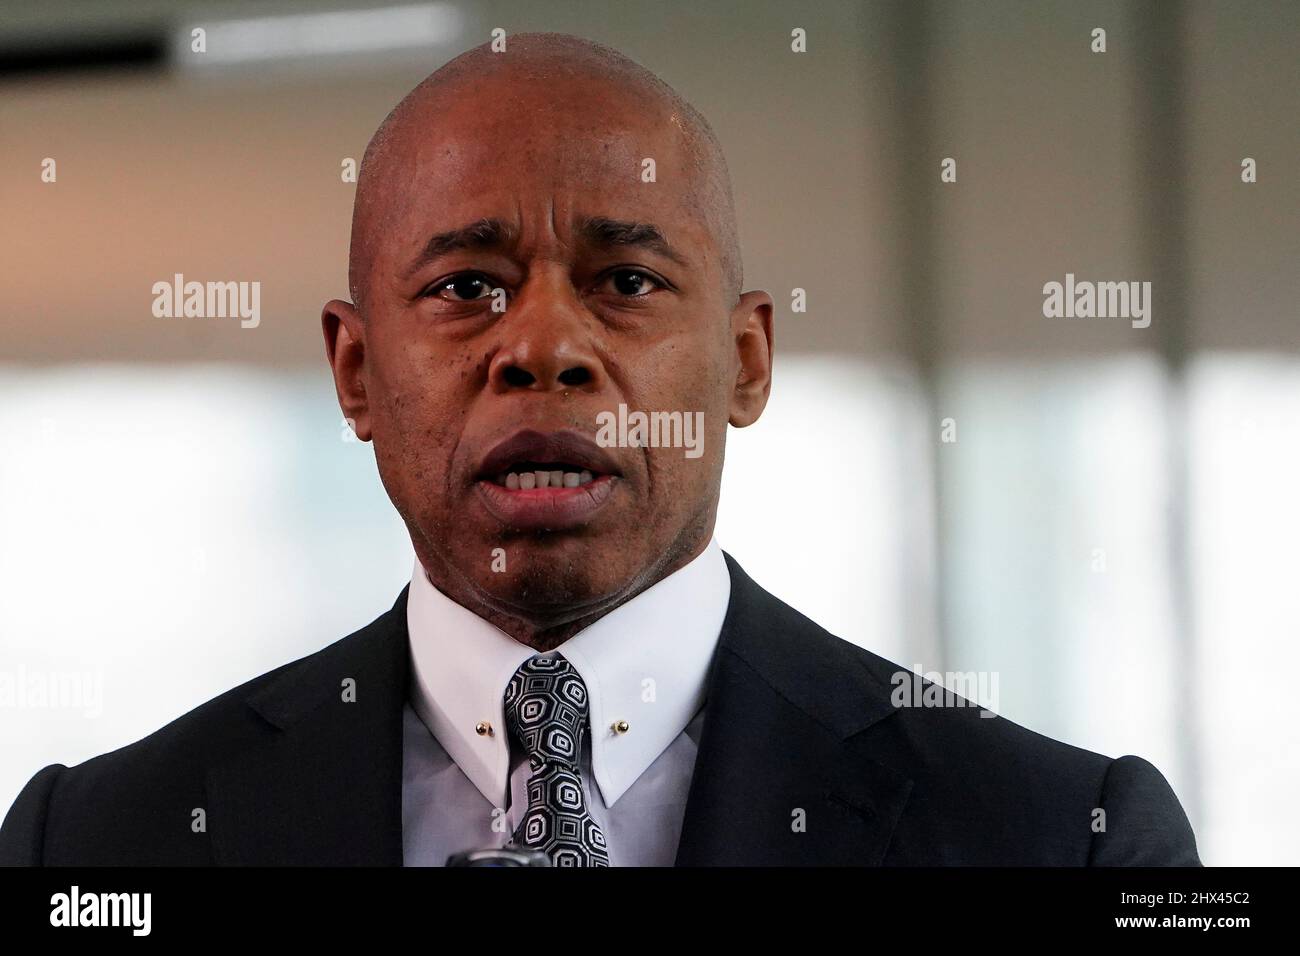 New York City Mayor Eric Adams speaks at a news conference about the newly renovated David Geffen Hall, in the Manhattan borough of New York City, New York, U.S., March 9, 2022.  REUTERS/Carlo Allegri Stock Photo